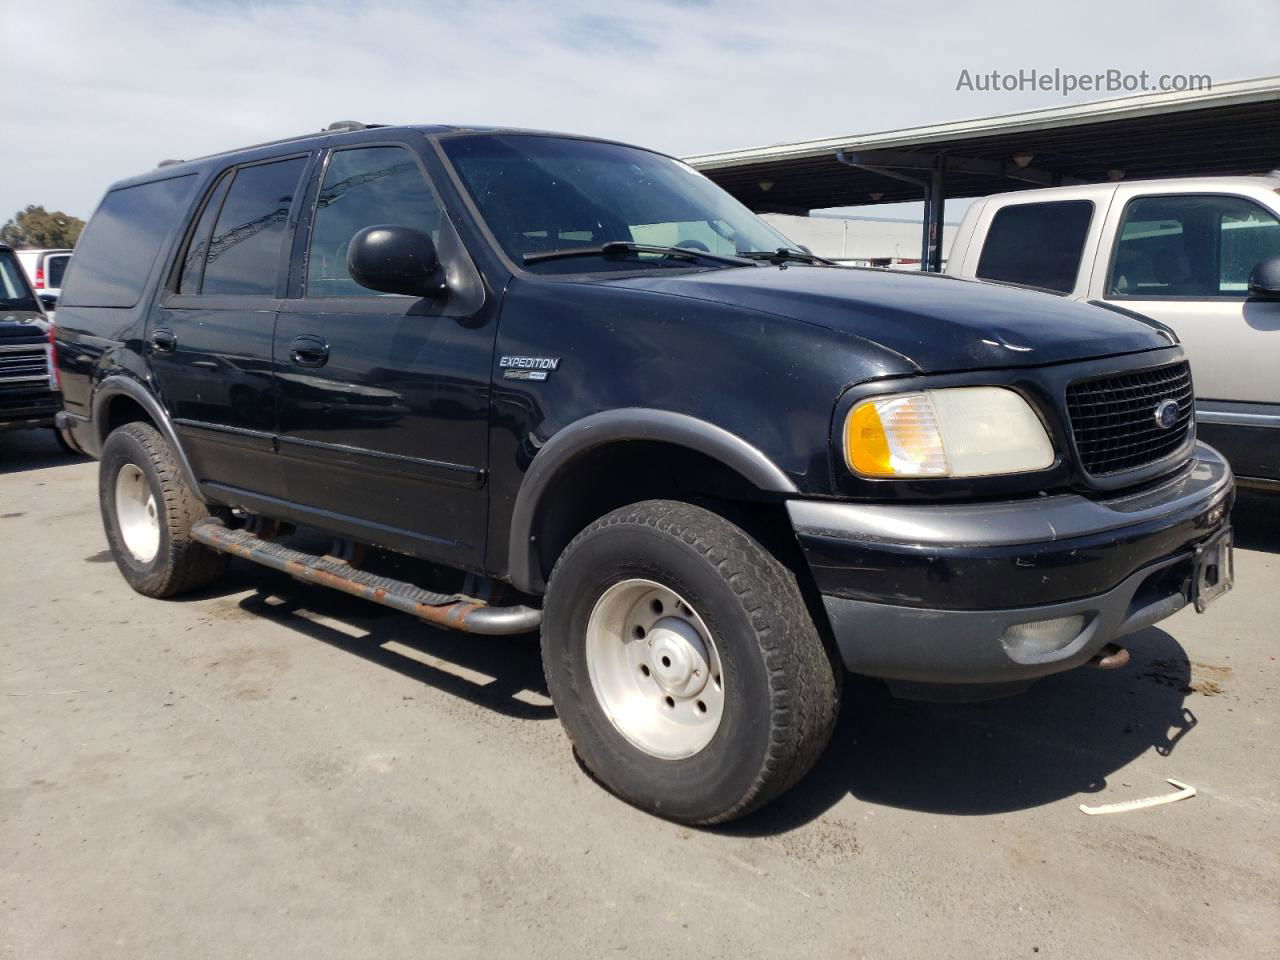 2000 Ford Expedition Xlt Black vin: 1FMPU16LXYLA61727